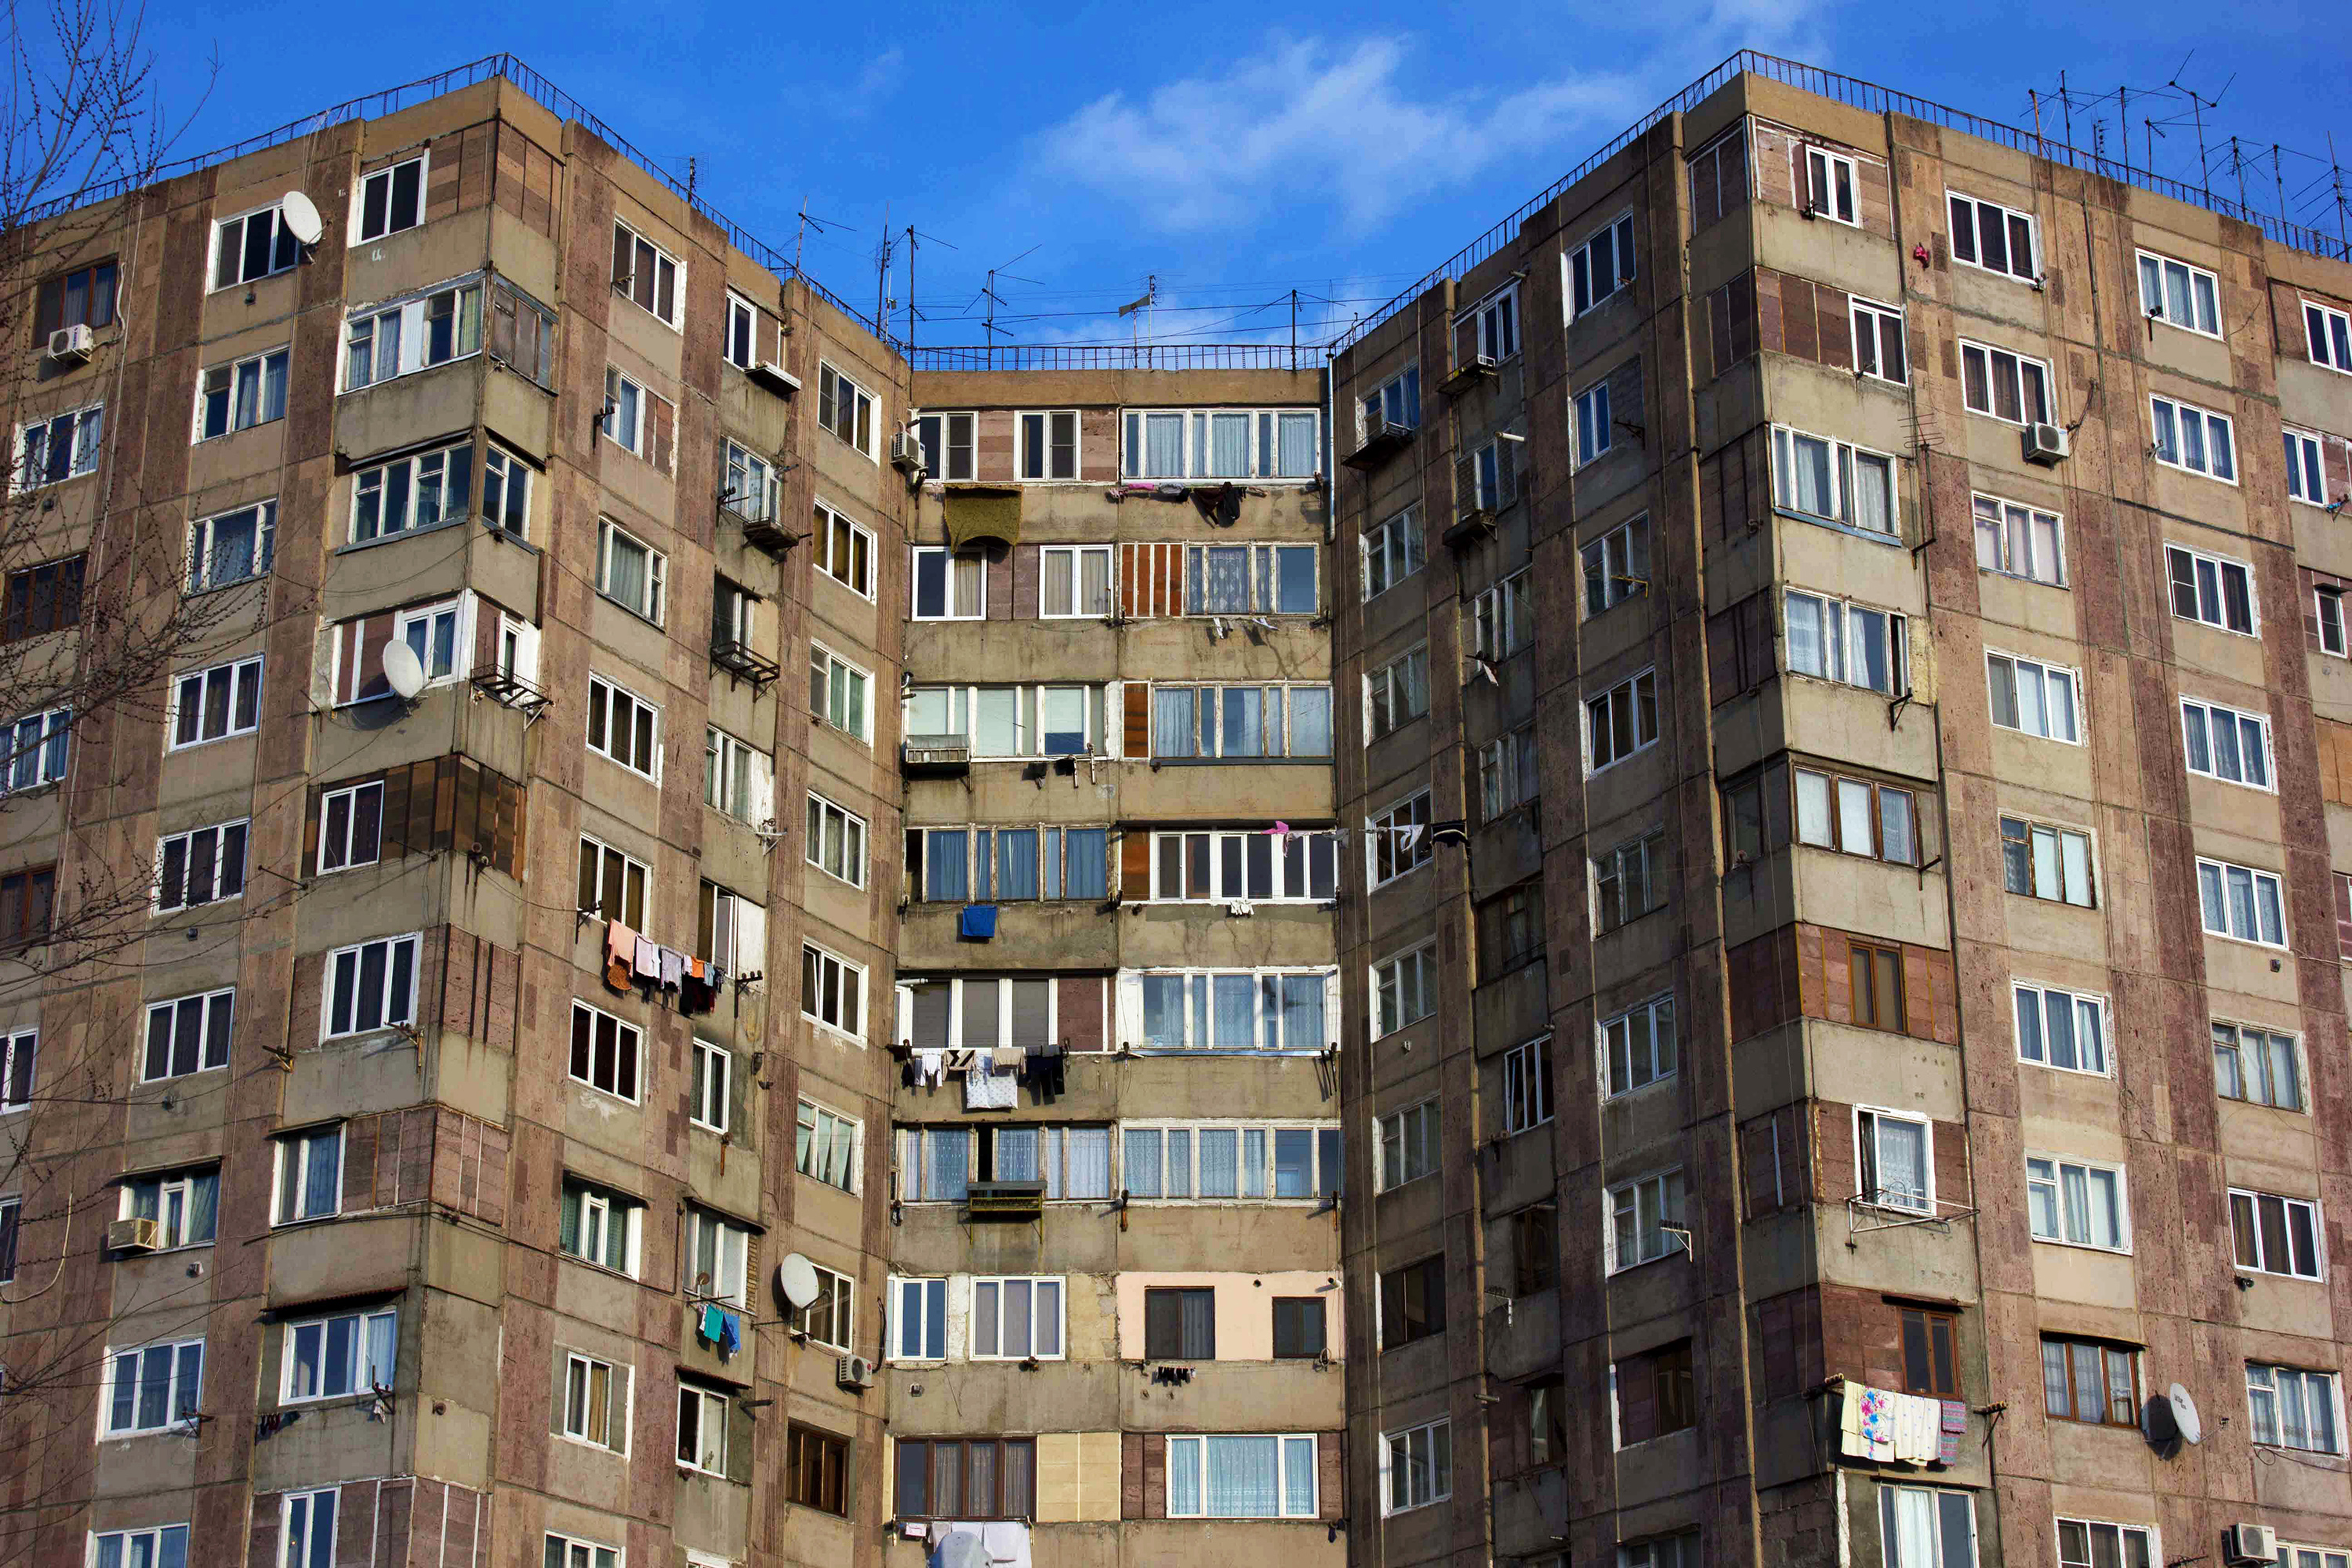 The Unbearable Grayness of Buildings: Soviet Architecture ...